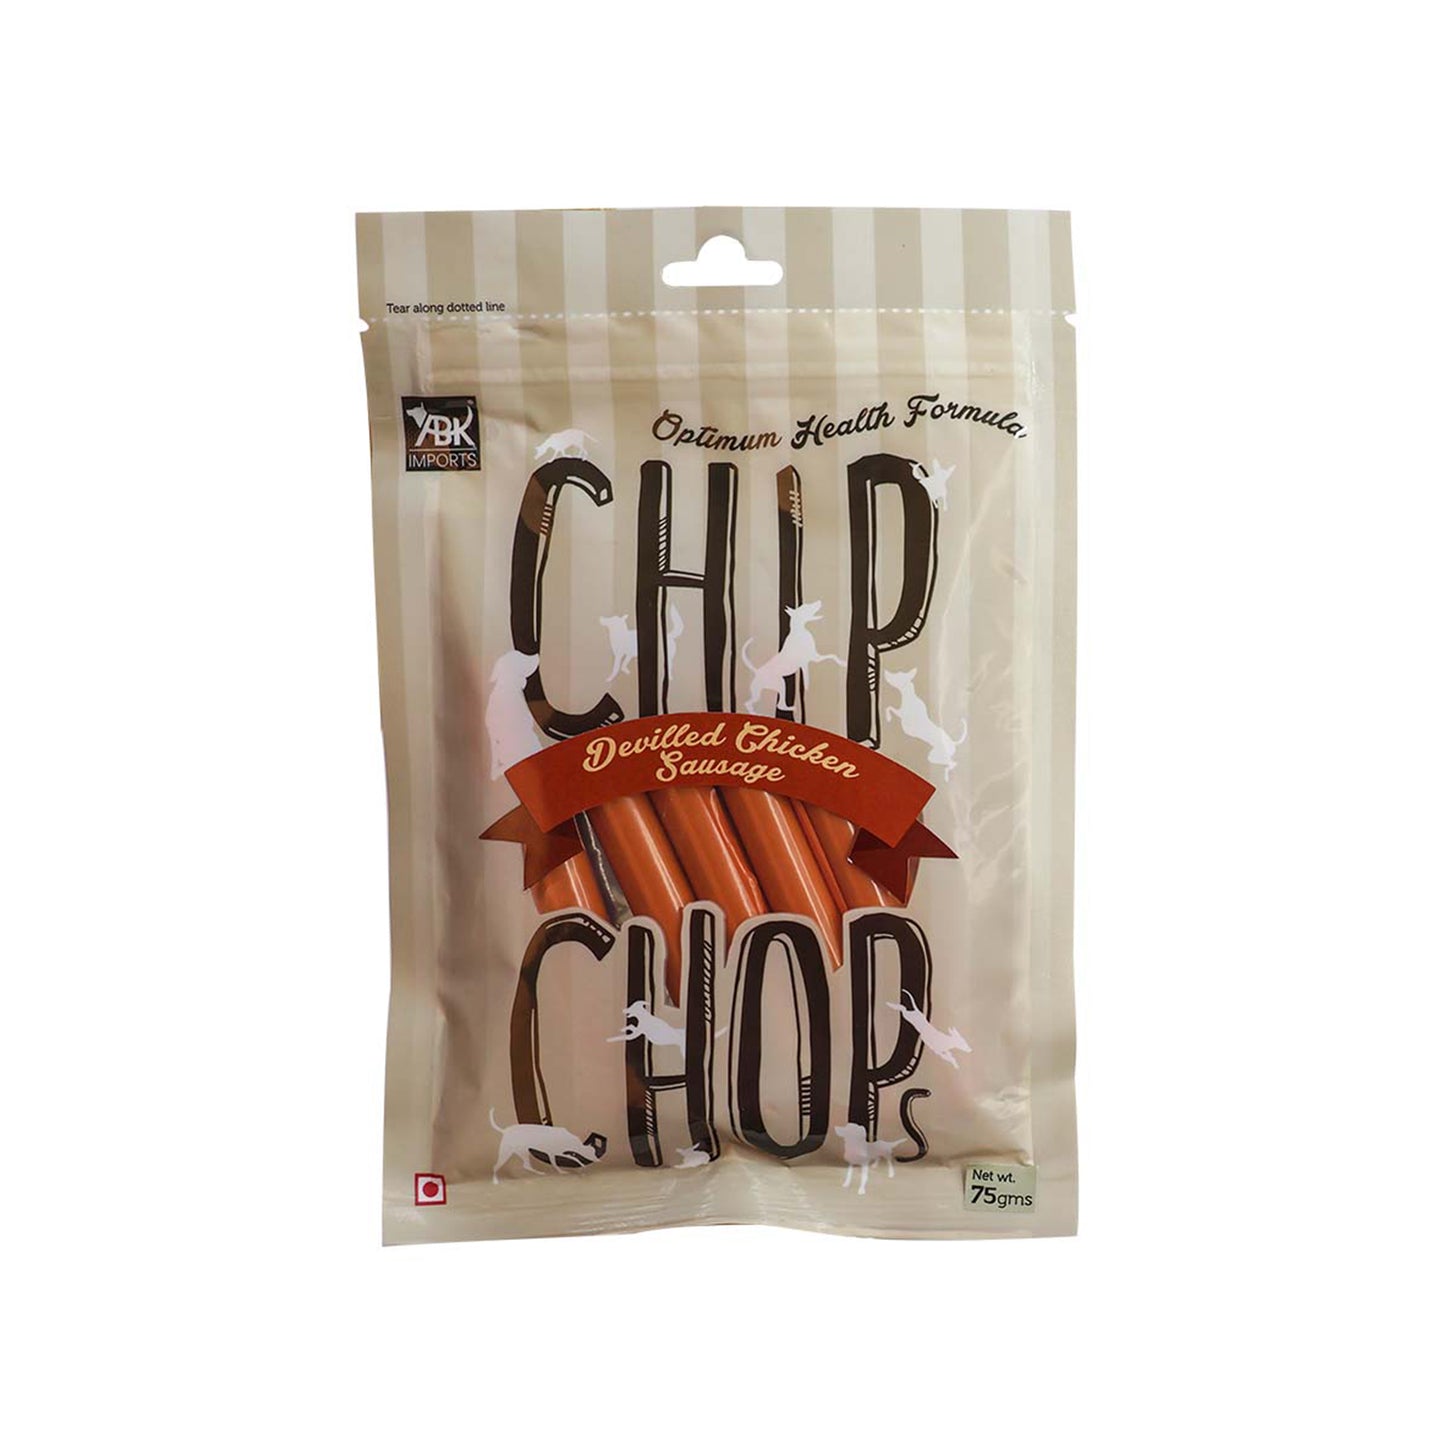 Chip Chops - Chicken Sausages For Dogs